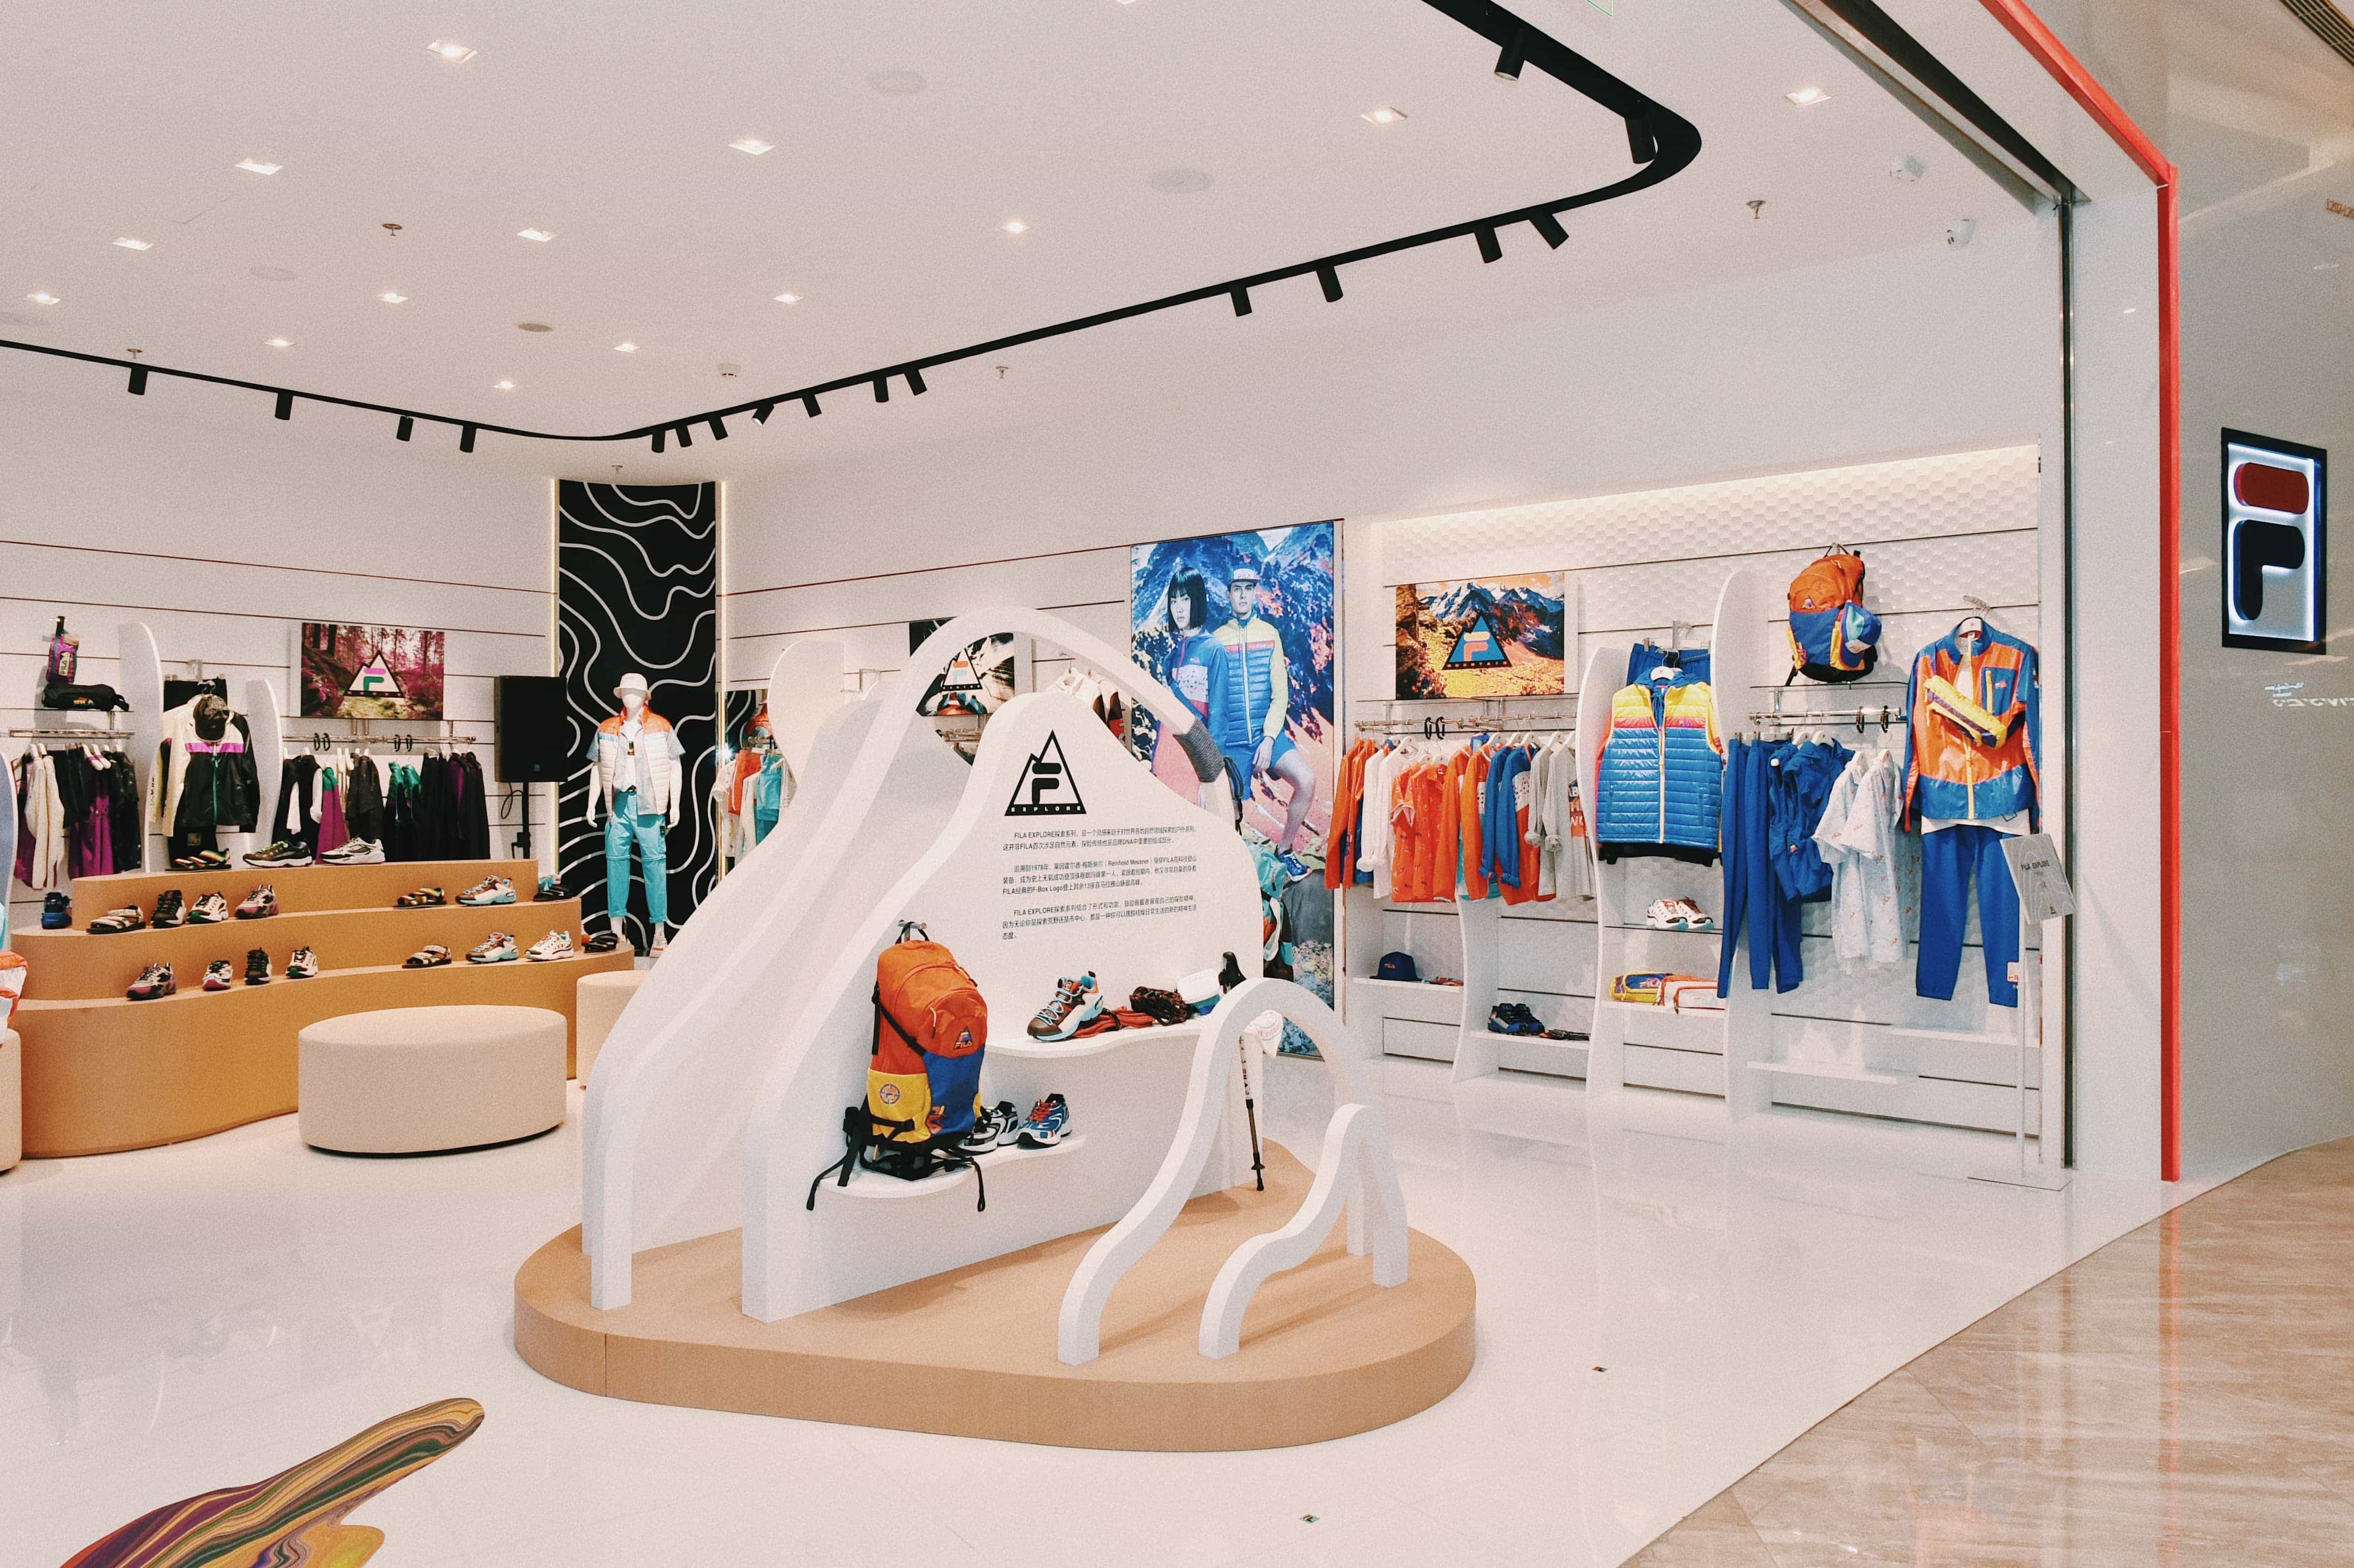 What Happened When FILA Launched 'Explore' Pop-Ups Around the World